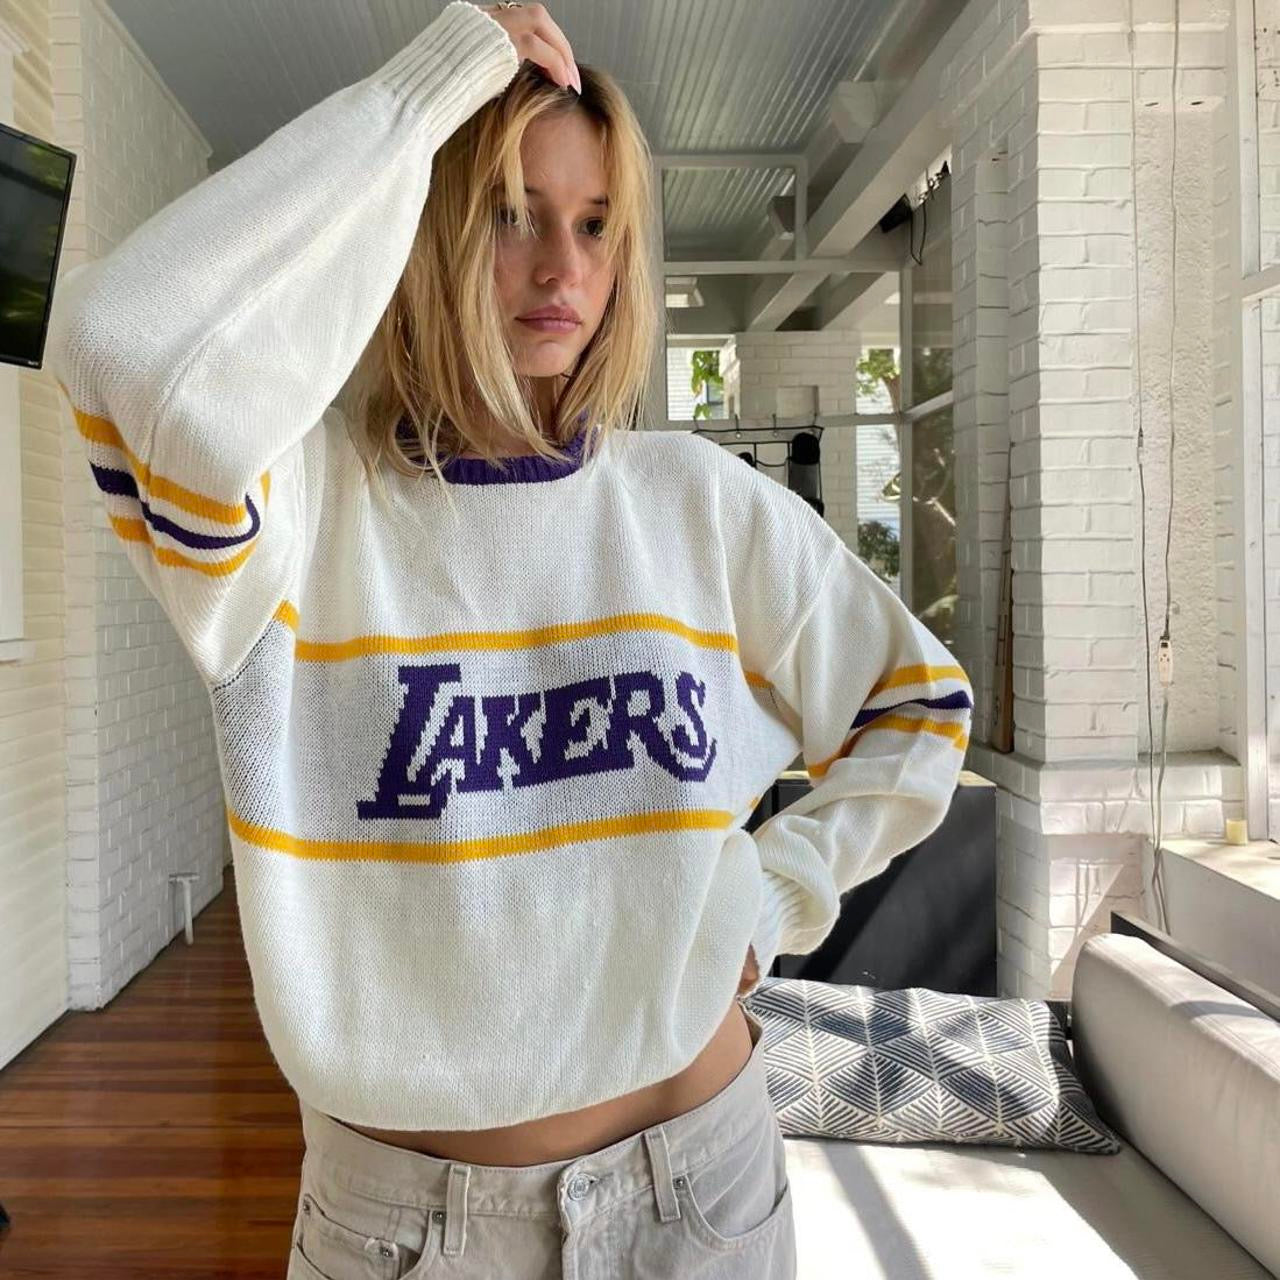 Vintage Lakers dreamy knit sweater